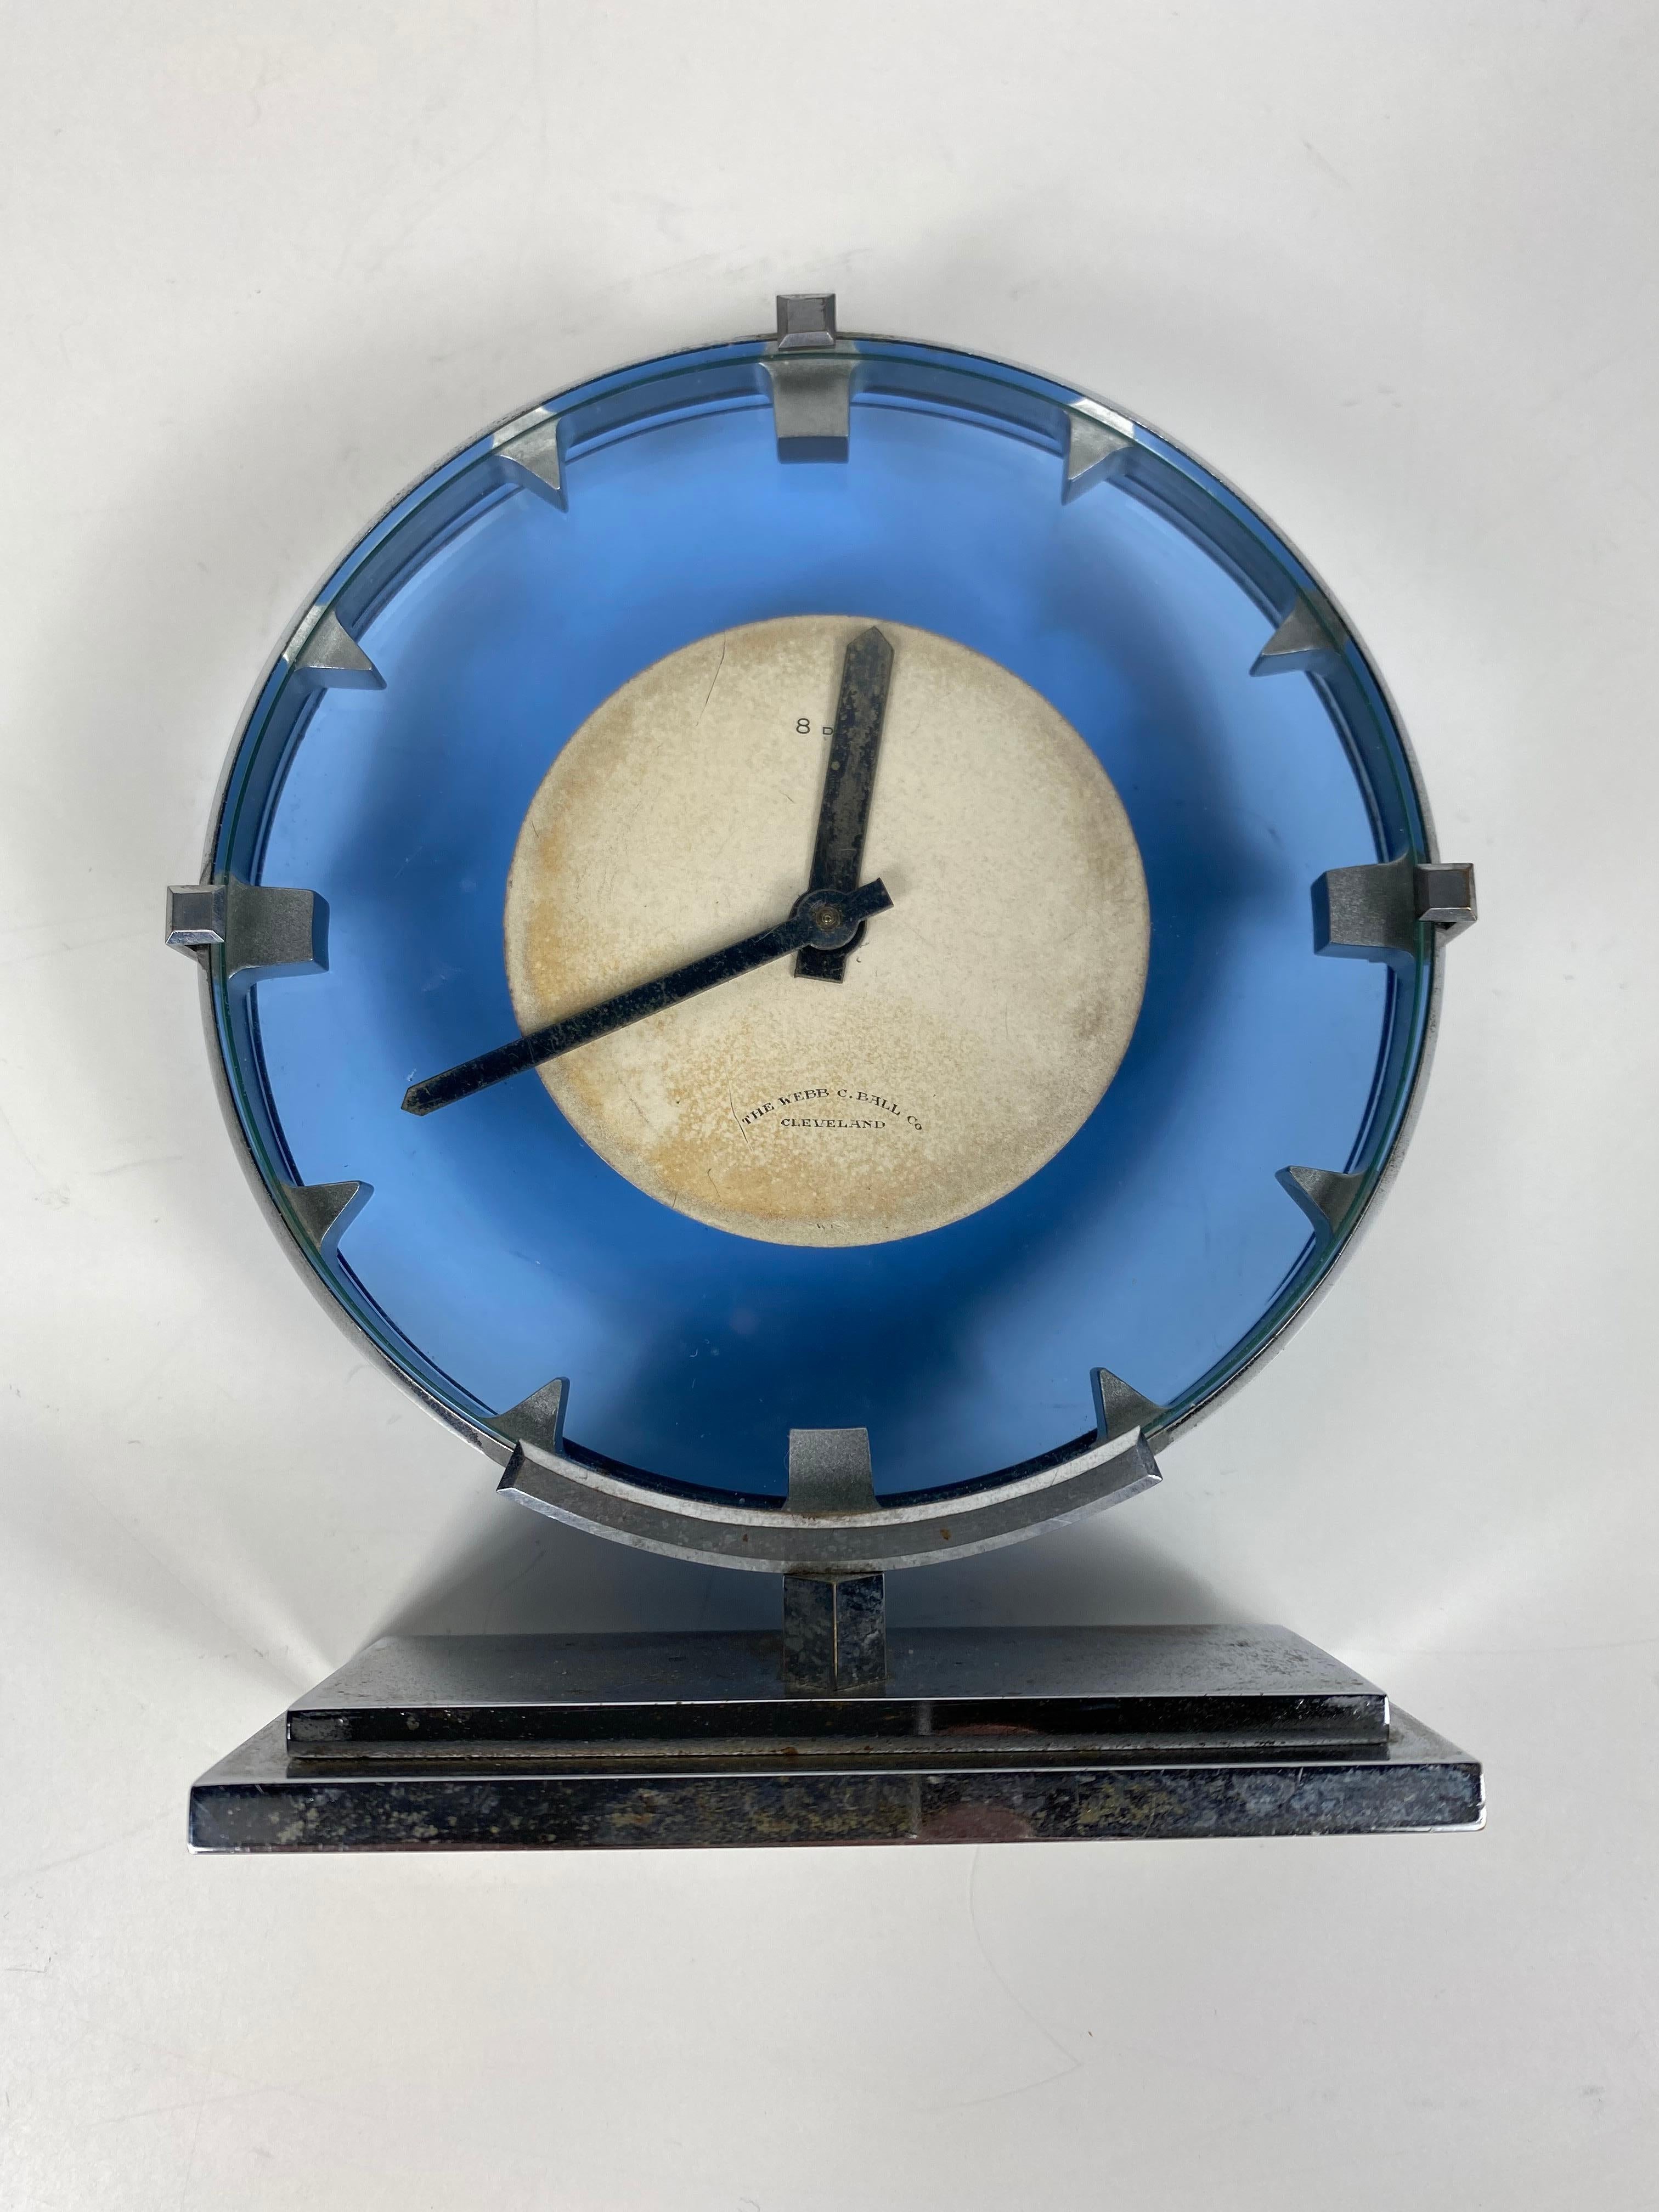 Stunning stainless steel and blue glass Art Deco / Machine Age clock manufactured by The Webb C.Ball co...Cleveland, wind up 8 day table clock, Classic modernist design.. runs and keeps perfect time.

The WEBB C. BALL CO. was one of Cleveland's